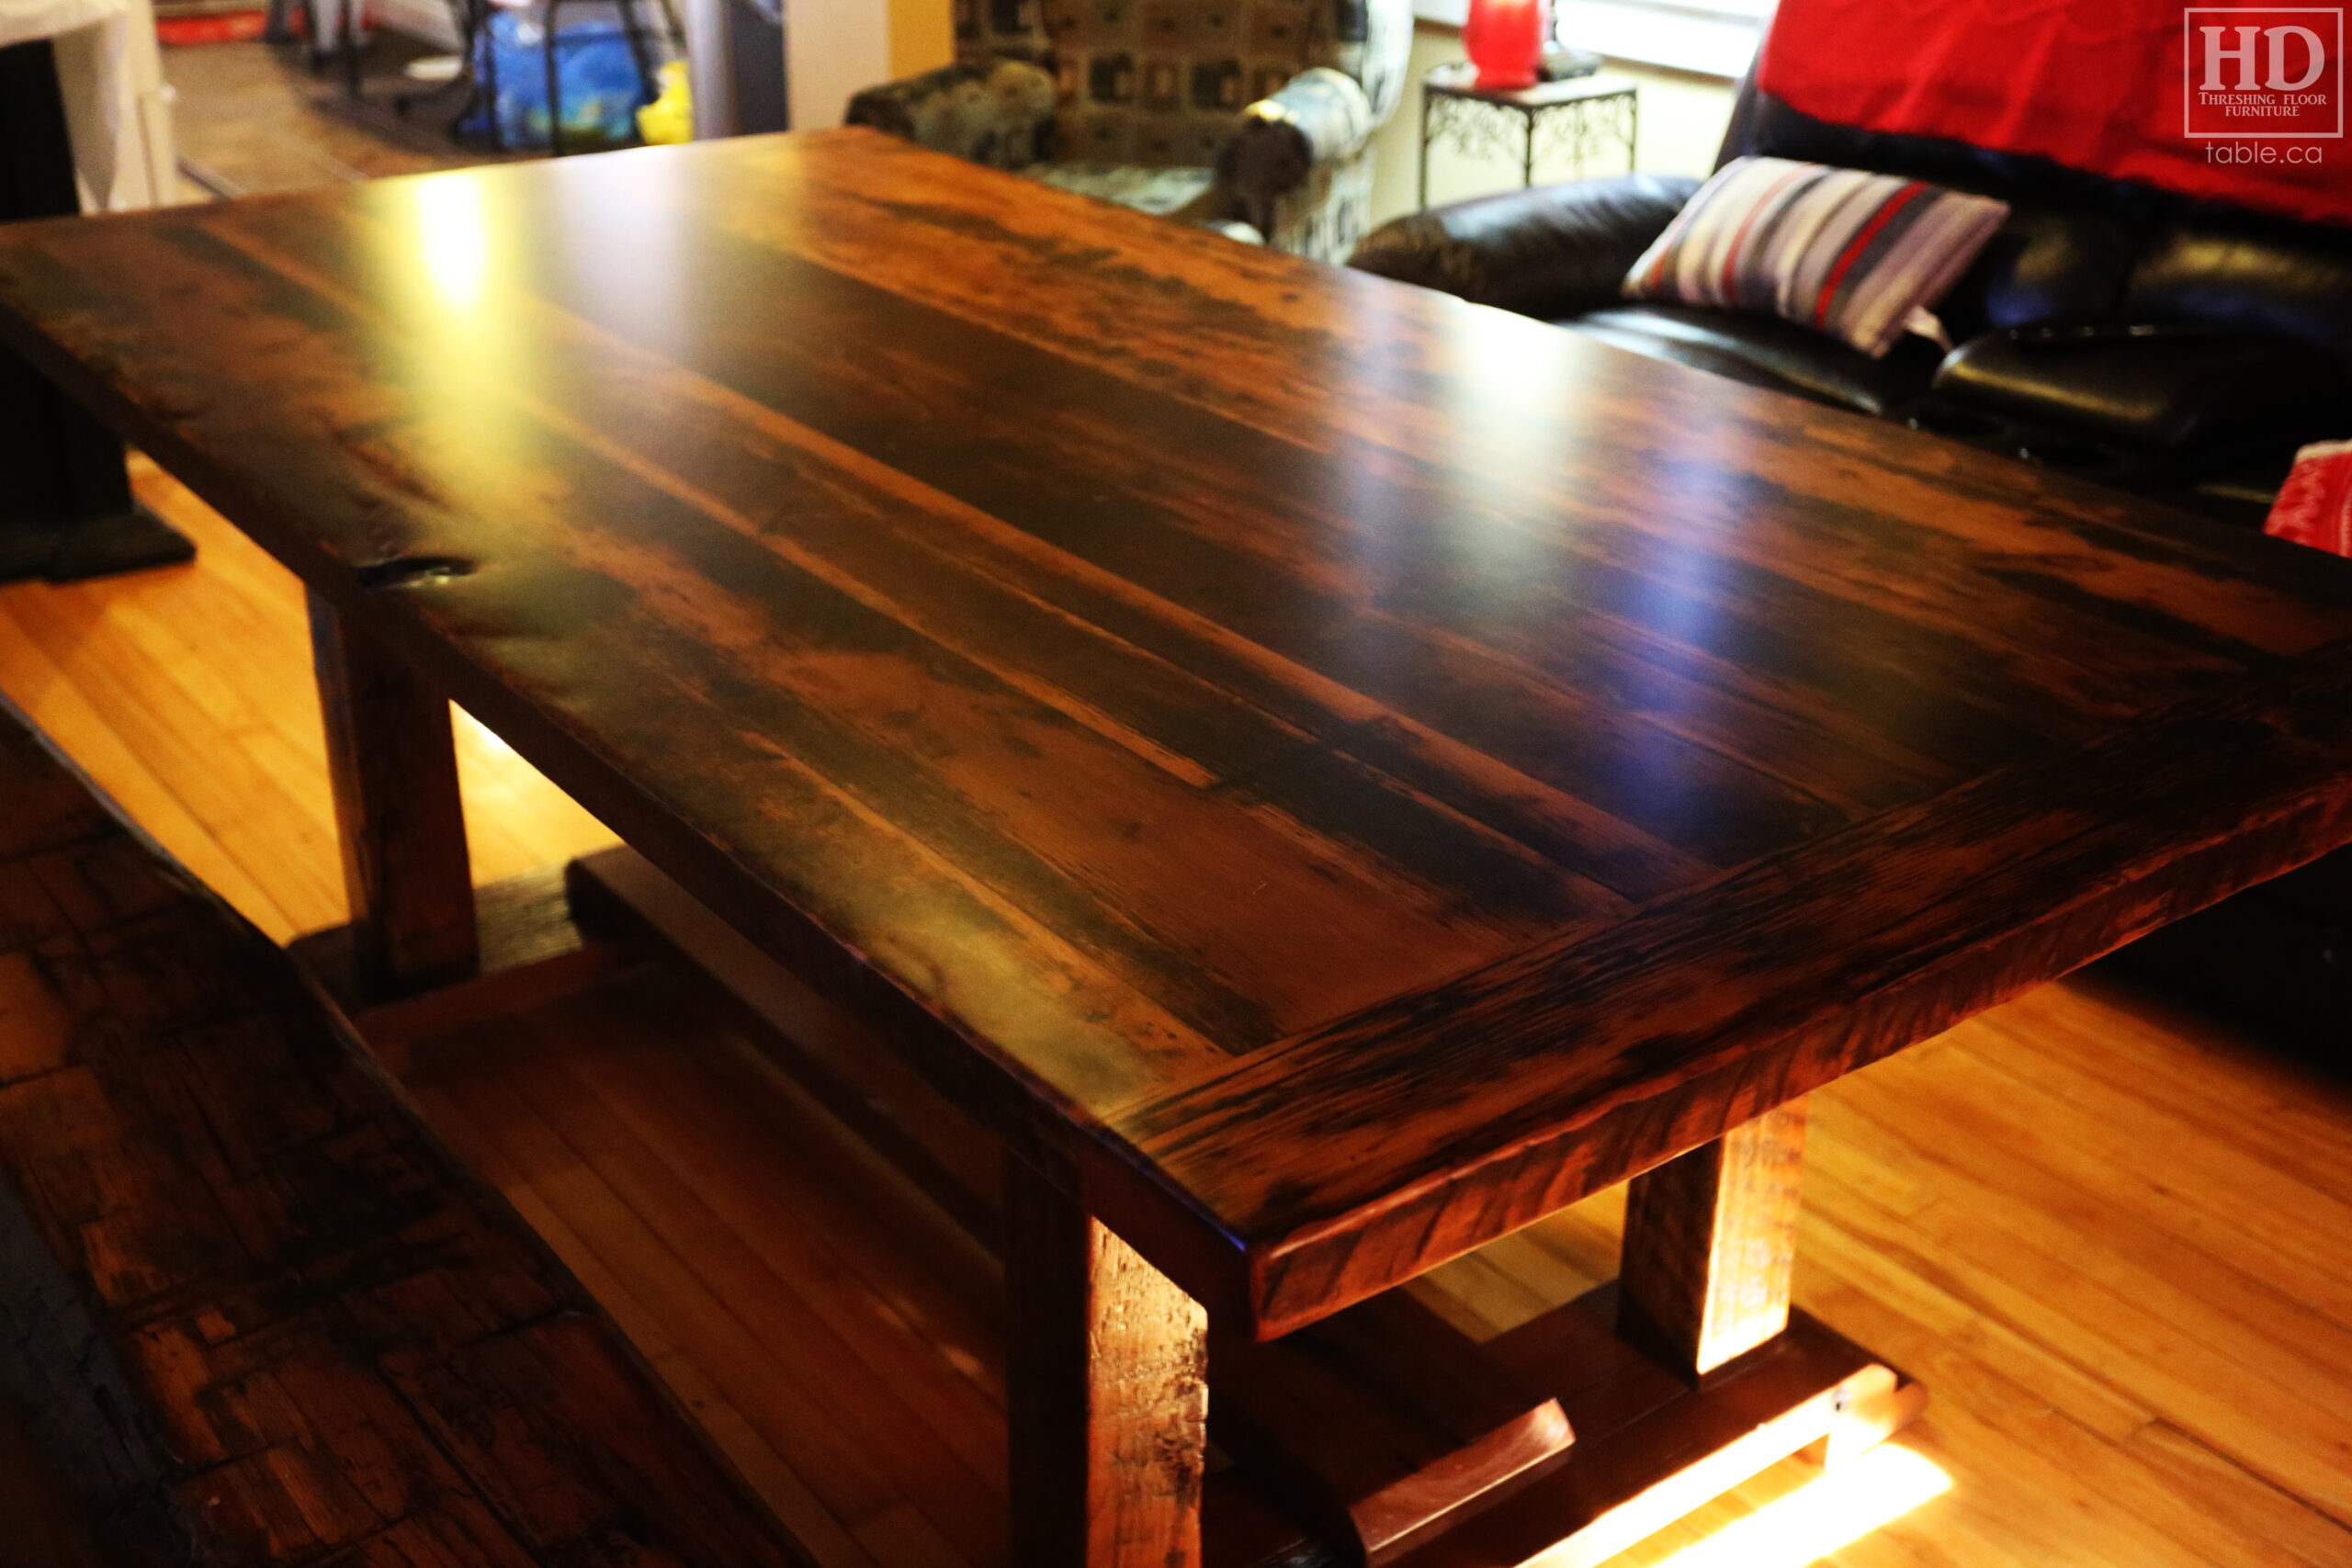 Reclaimed Wood Table with Frame Base by HD Threshing Floor Furniture / www.table.ca